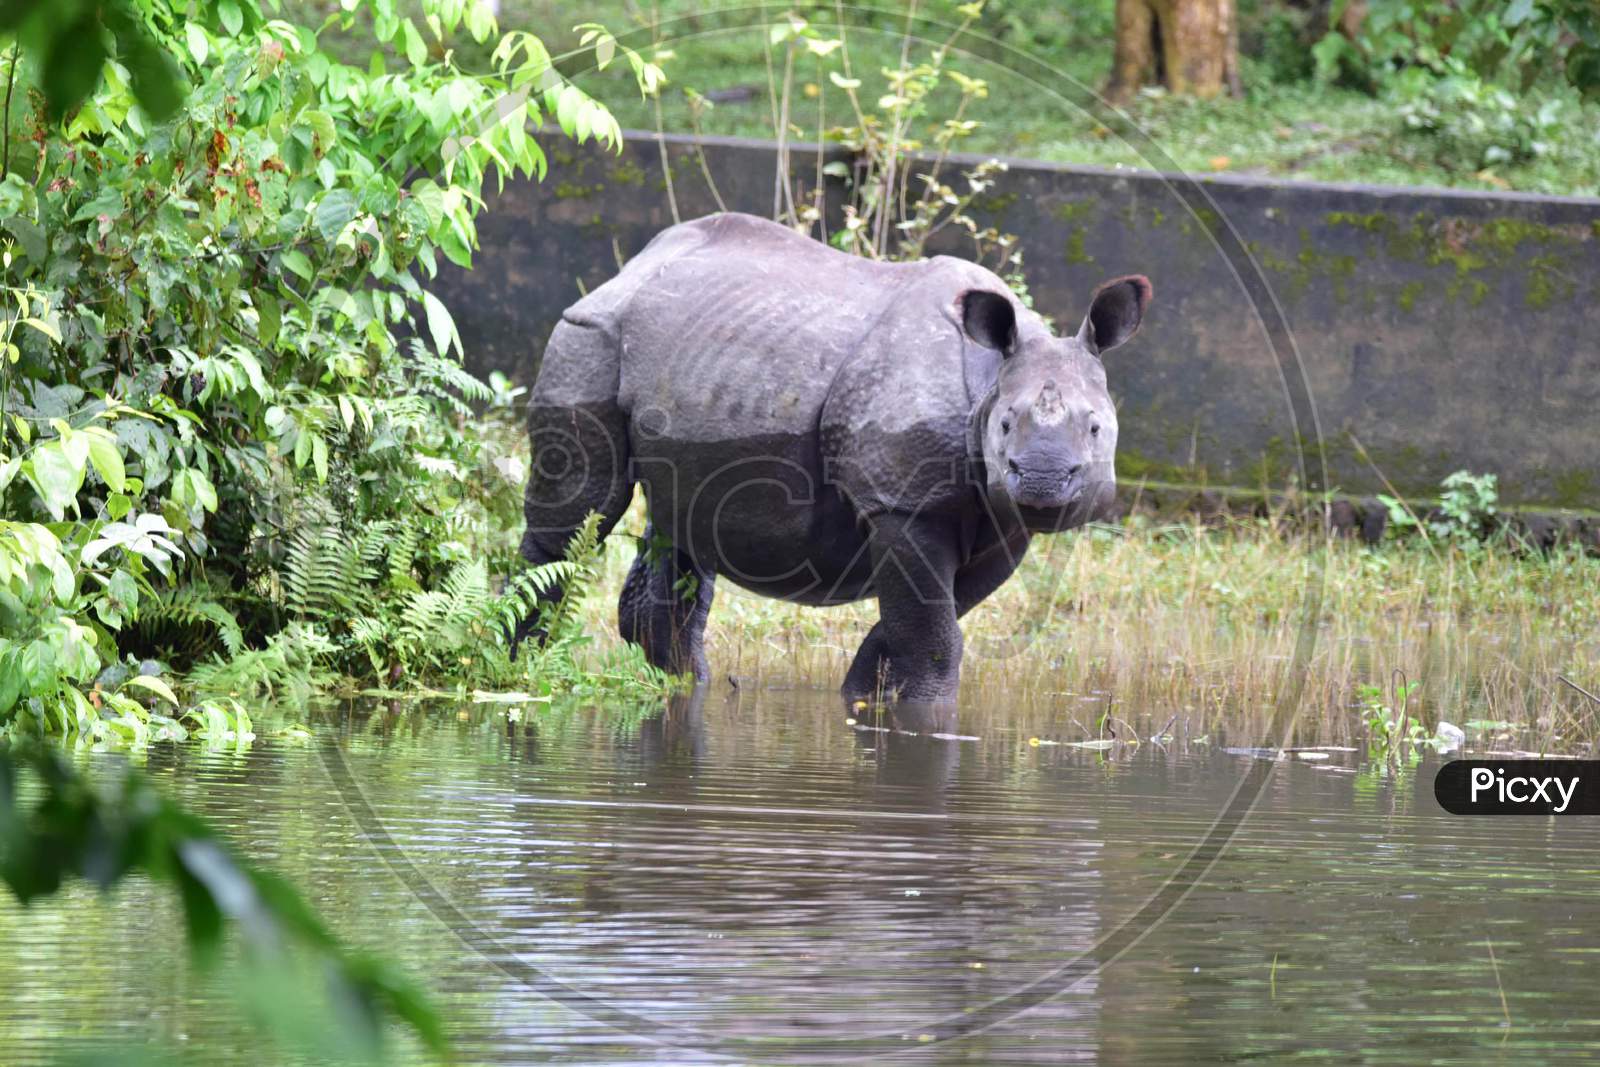 A rhino takes shelter on high ground to escape the flood in the Kaziranga National Park in Nagaon, Assam on July 16, 2020